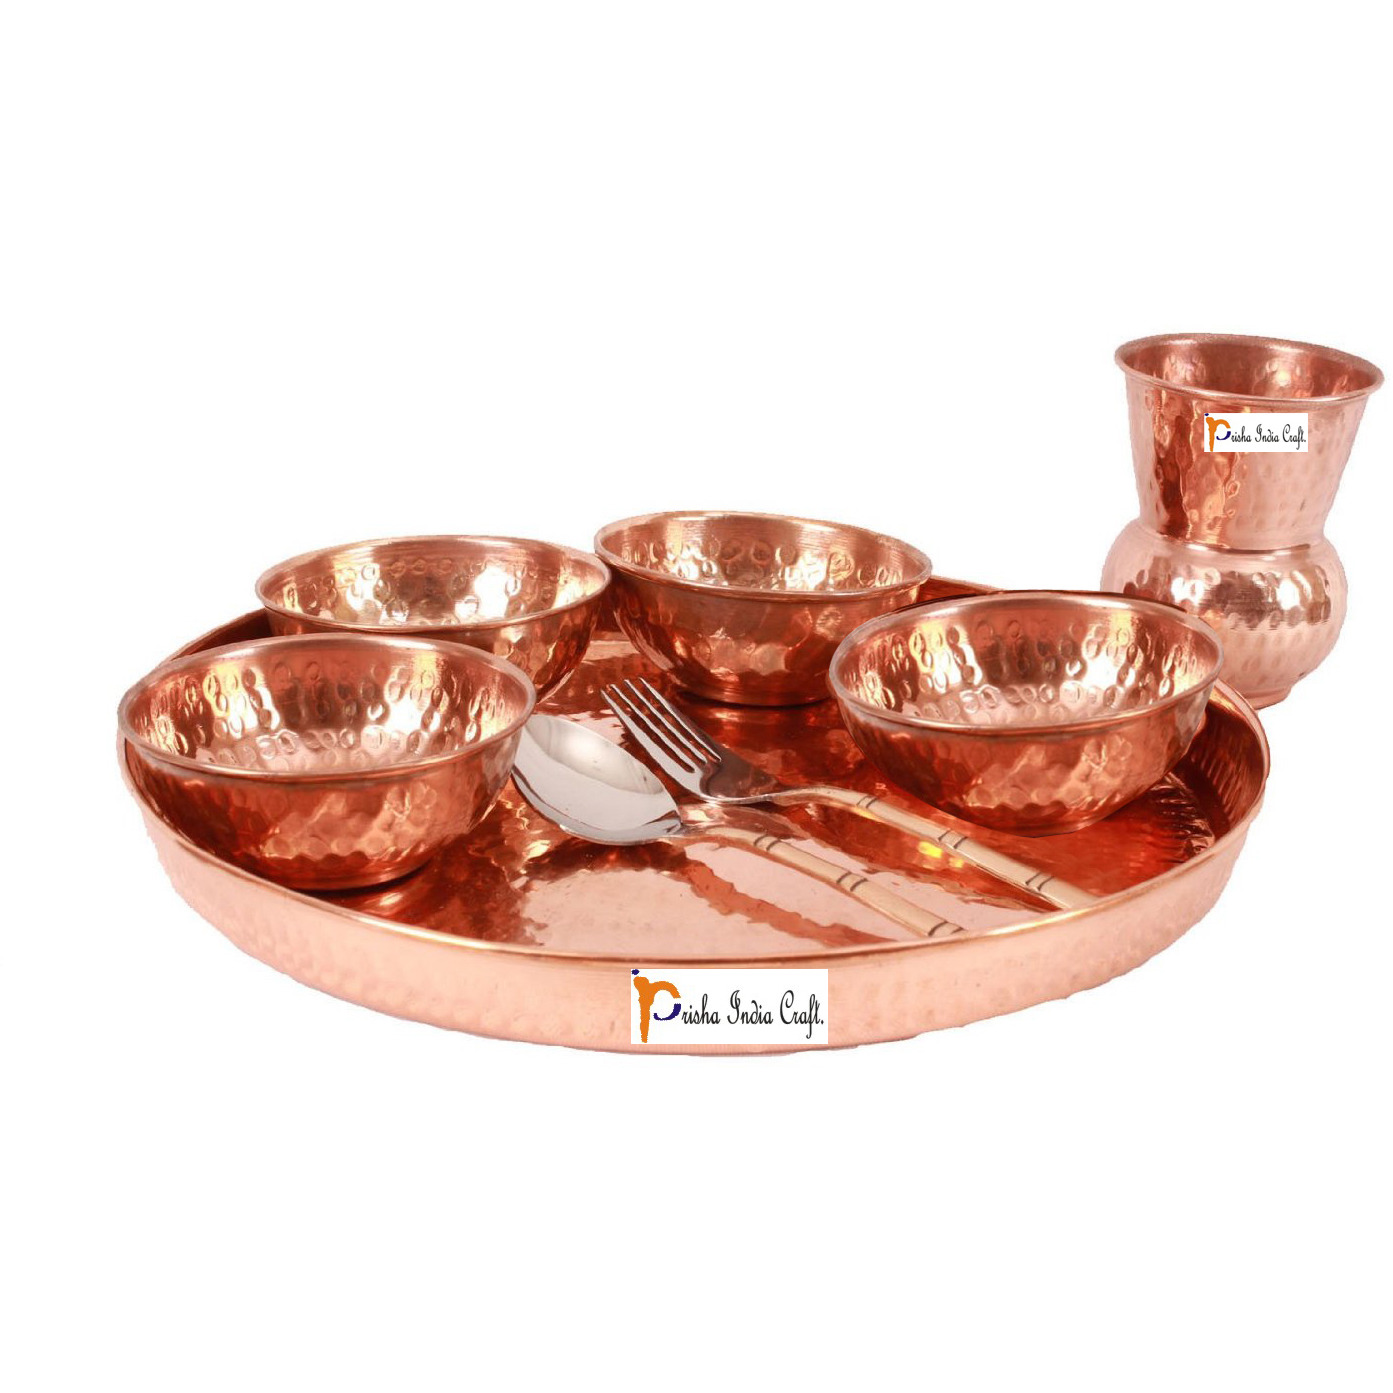 Prisha India Craft B. Dinnerware Traditional 100% Pure Copper Dinner Set of Thali Plate, Bowls, Glass and Spoon, Dia 12  With 1 Pure Copper Mughal Pitcher Jug - Christmas Gift